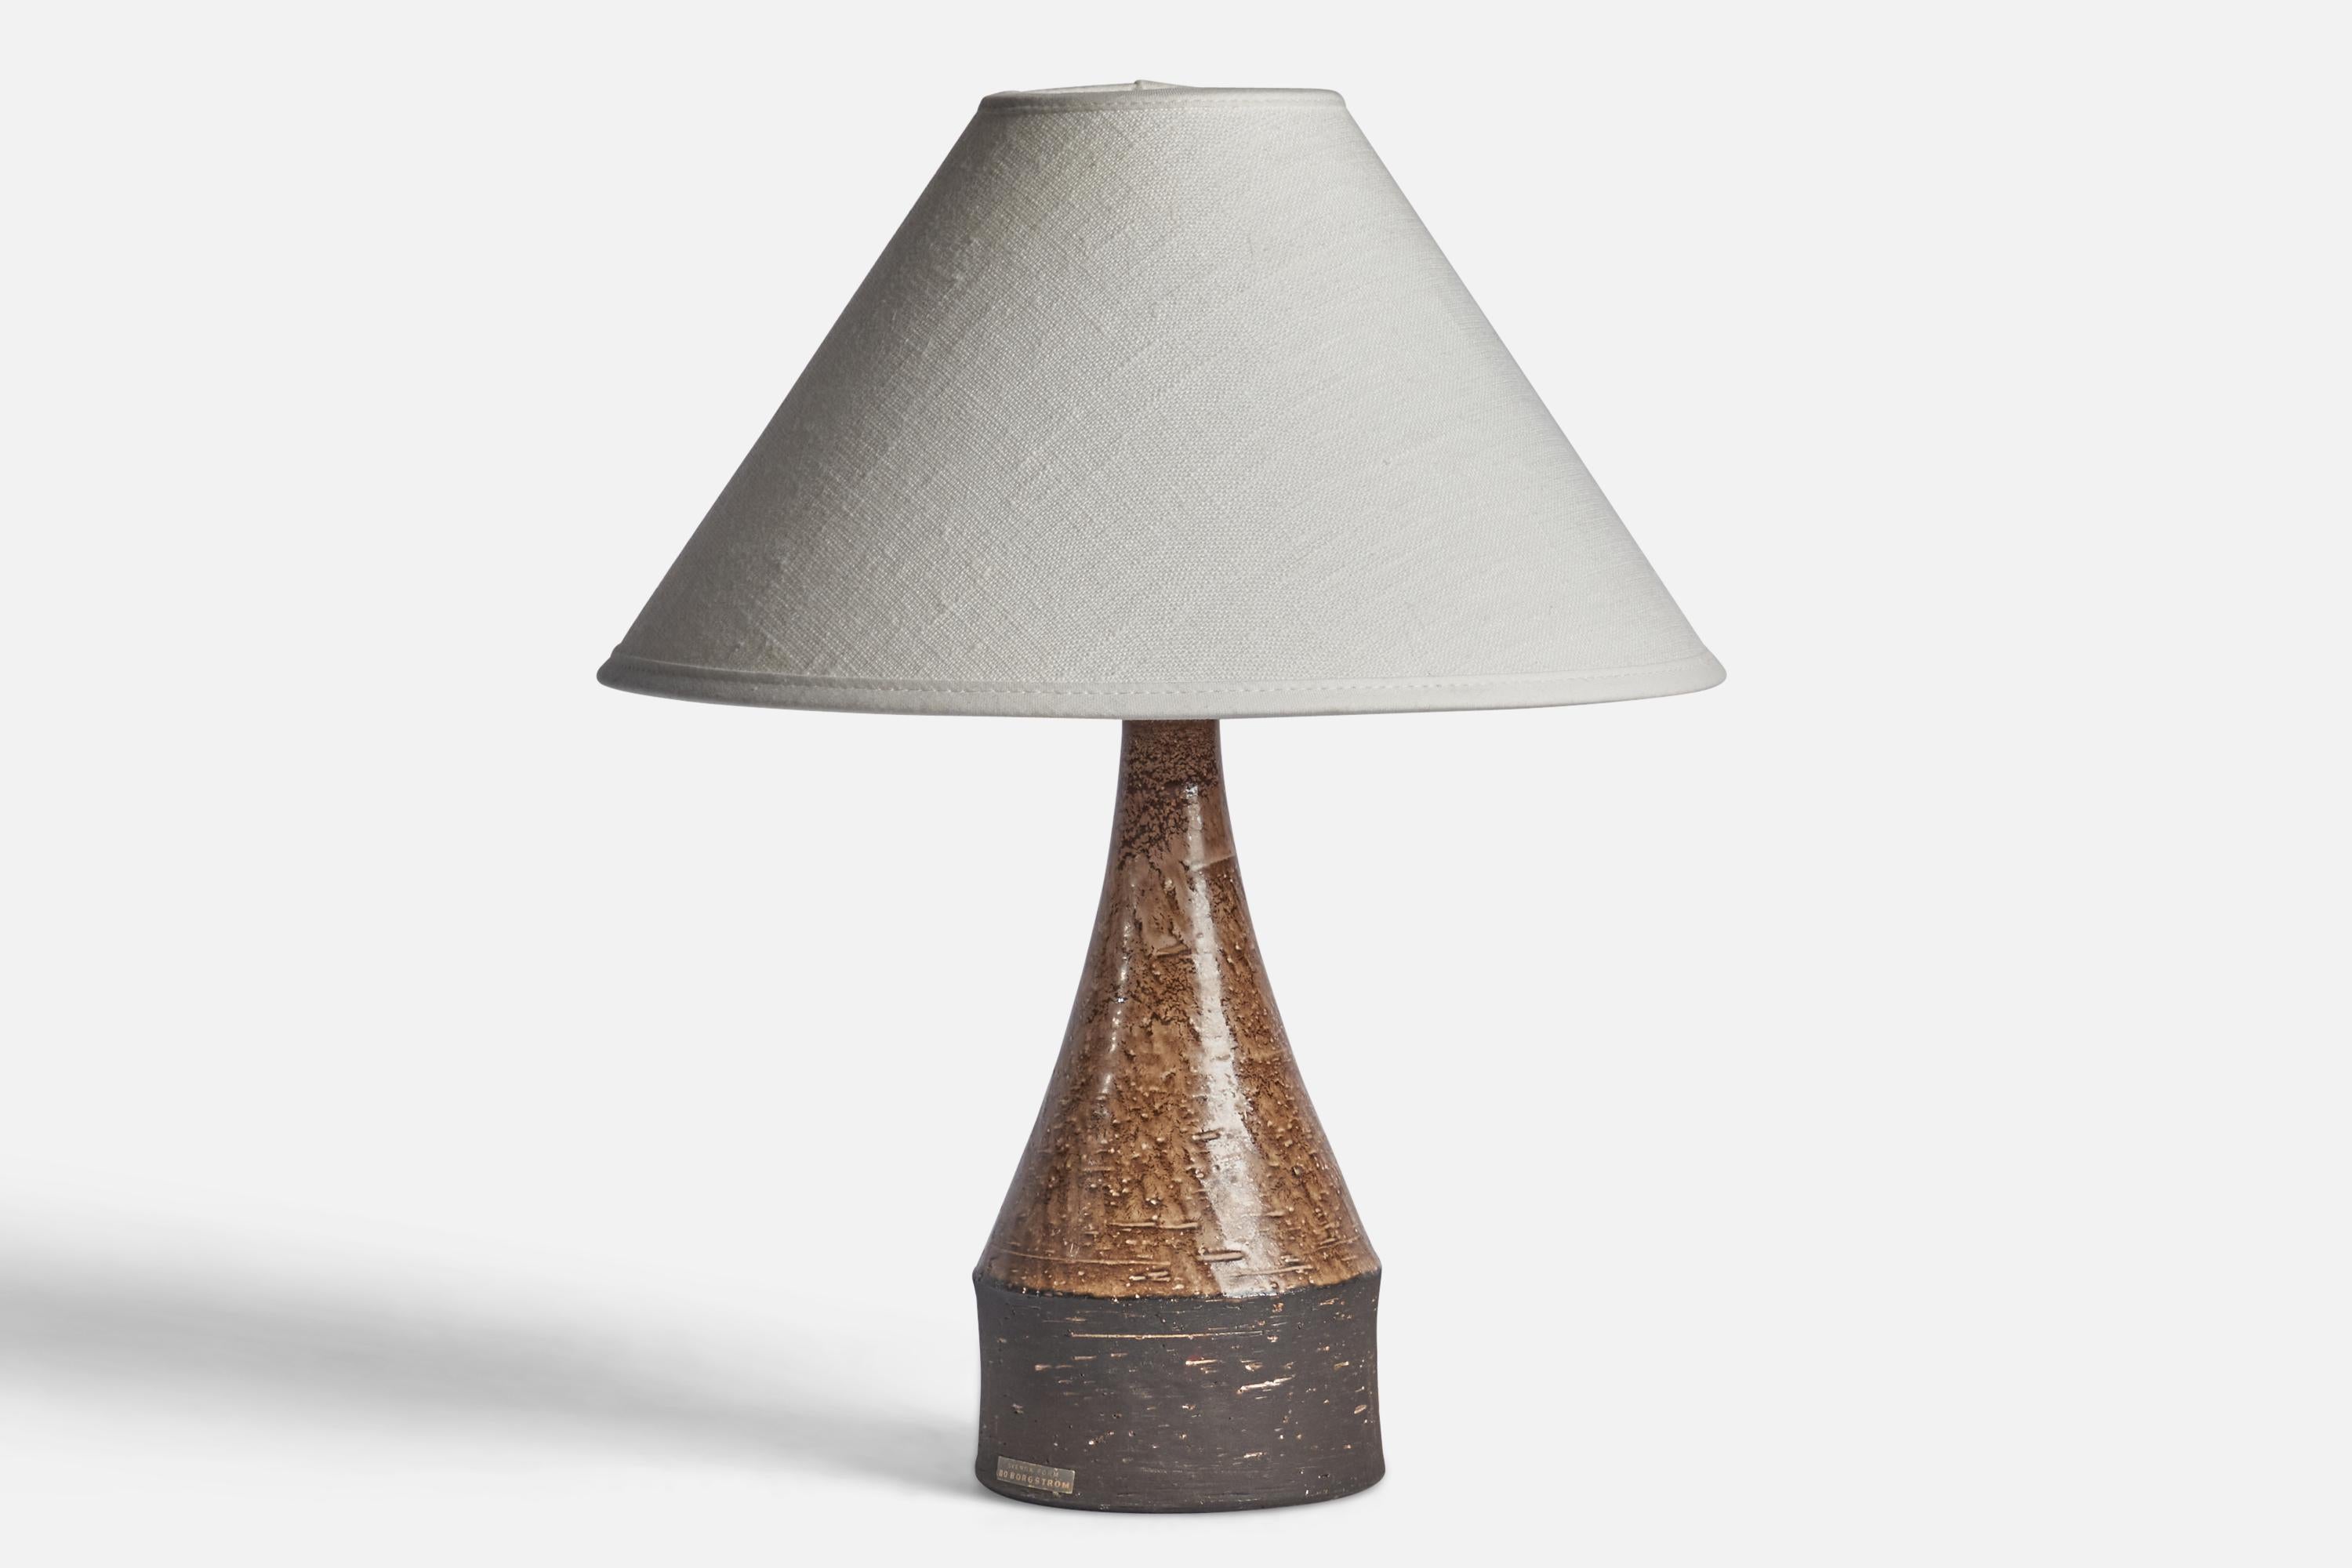 A brown-glazed table lamp designed and produced by Bo Borgström, Sweden, 1960s.

Dimensions of Lamp (inches): 9.25” H x 3.55 Diameter
Dimensions of Shade (inches): 2.5” Top Diameter x 10” Bottom Diameter x 5.5